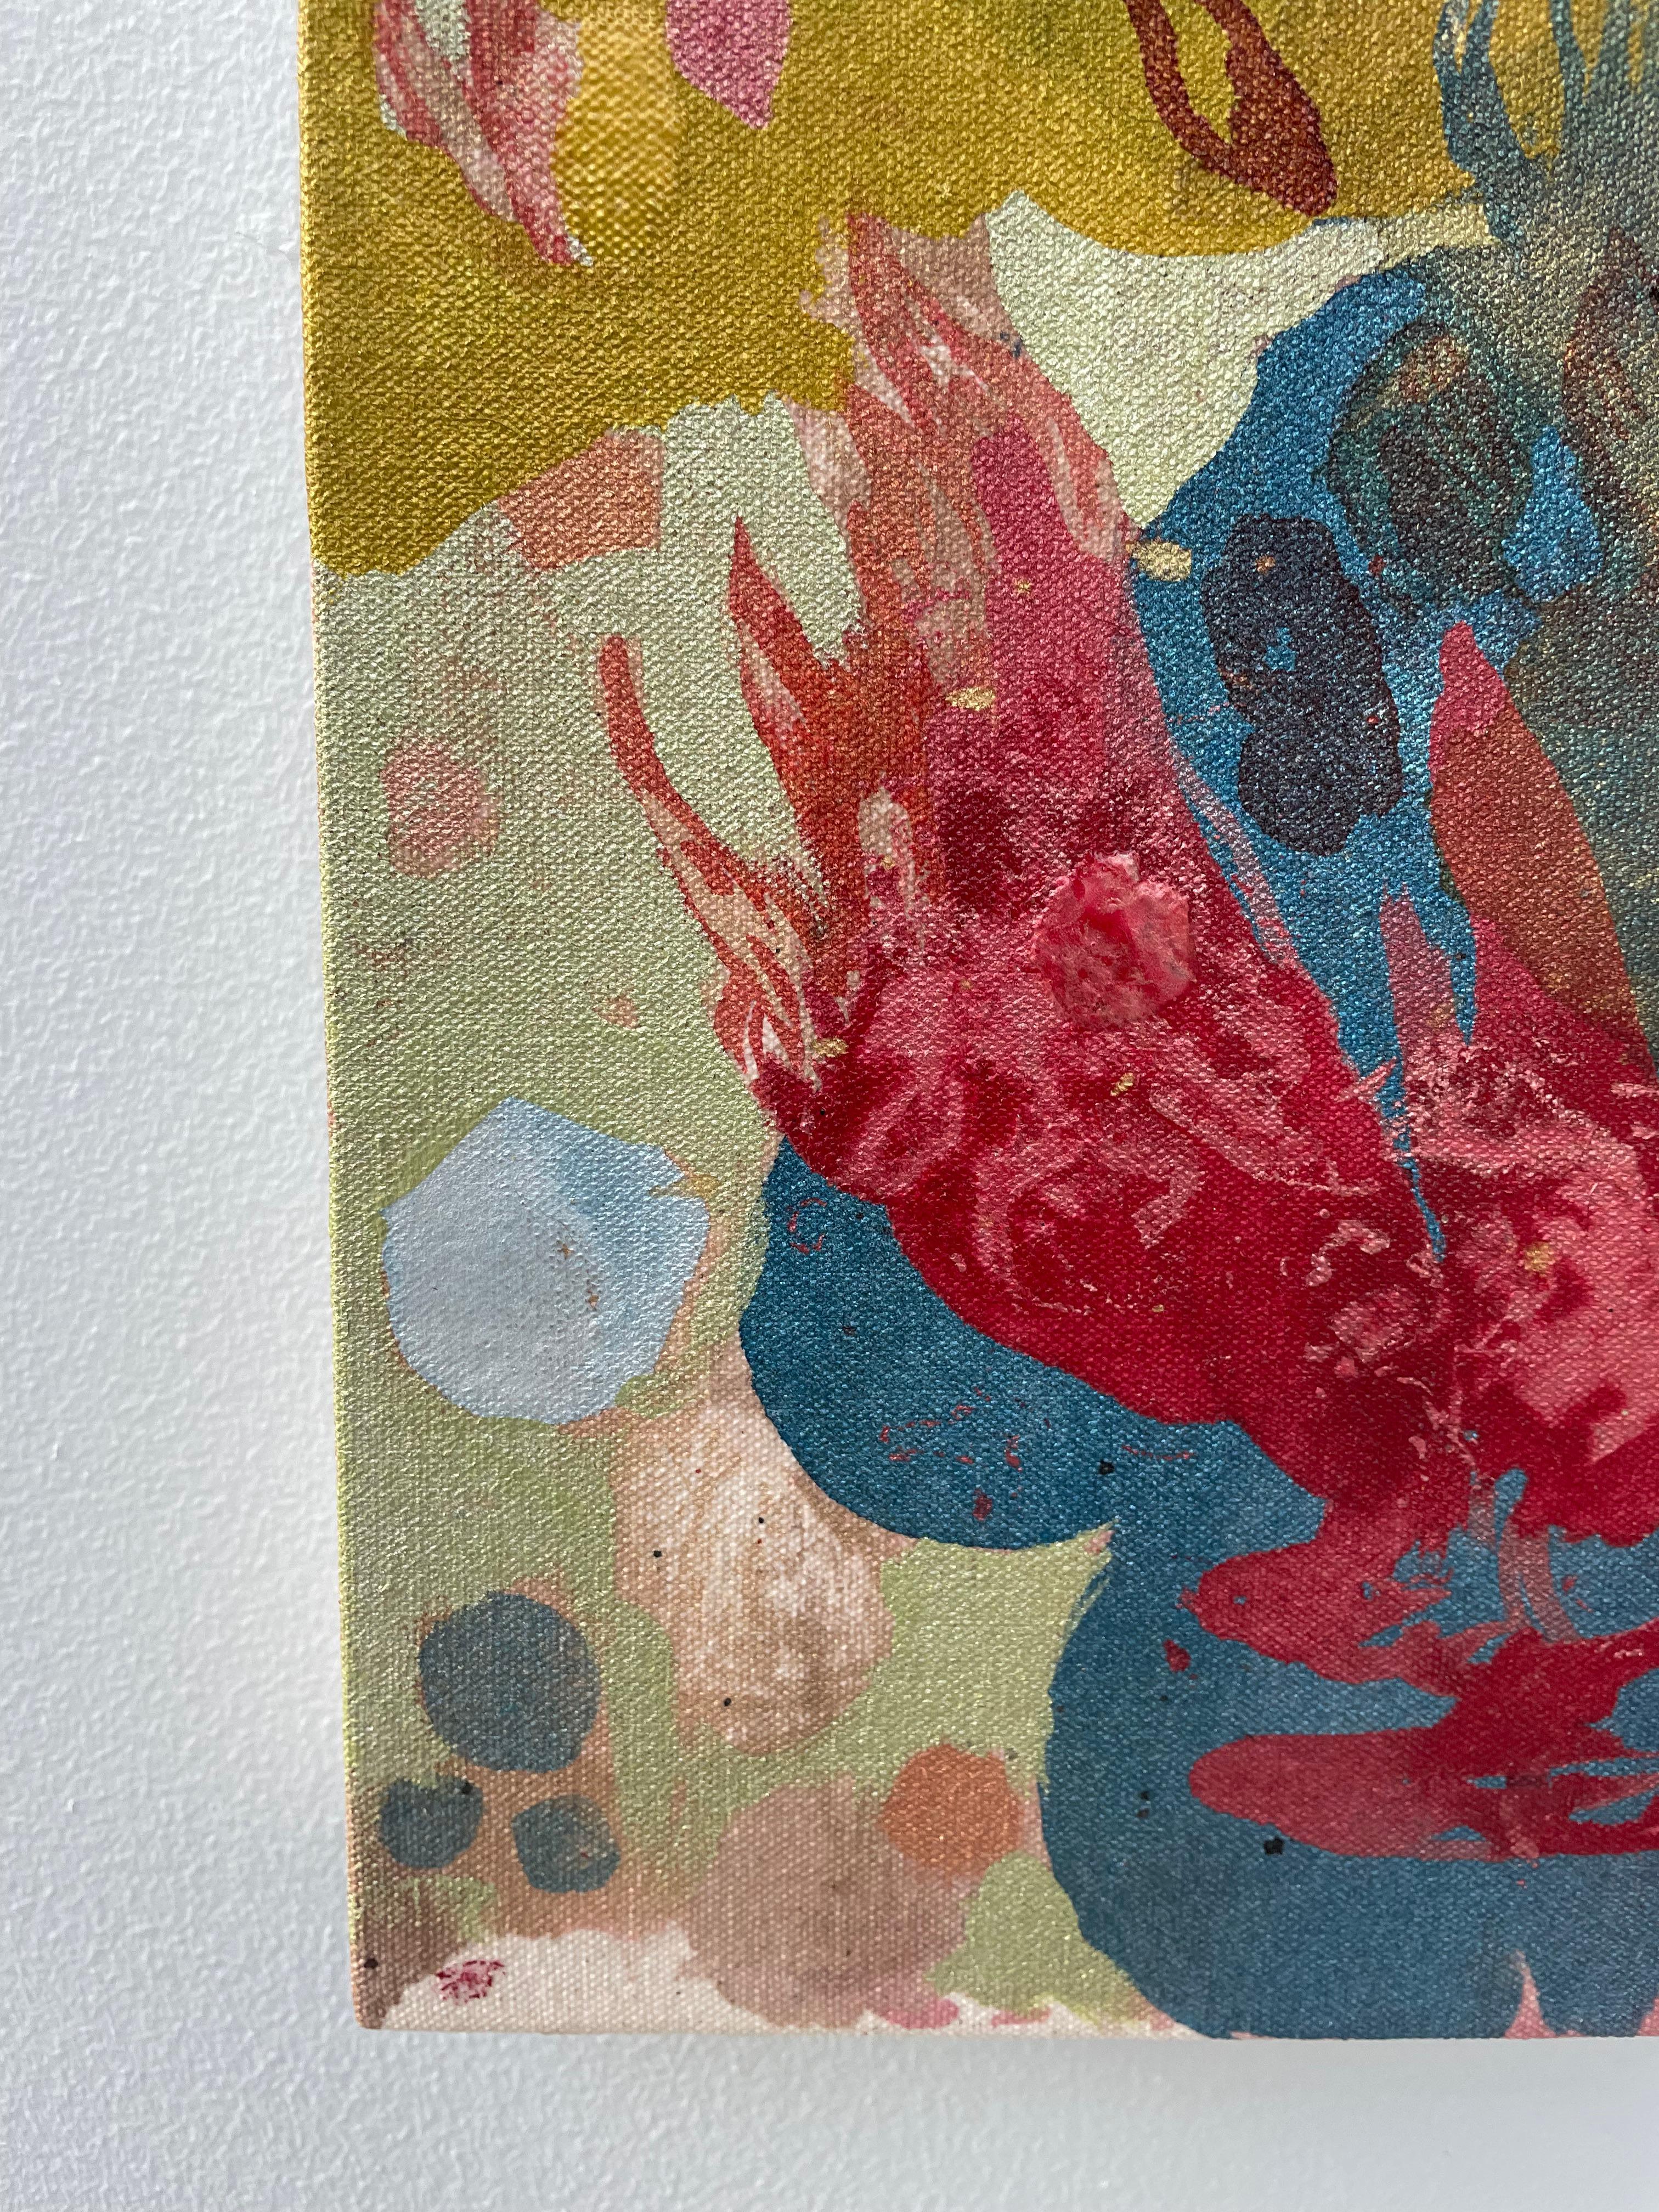 ABOUT HER EYES - small gestural abstract painting in gold, red and blue For Sale 4